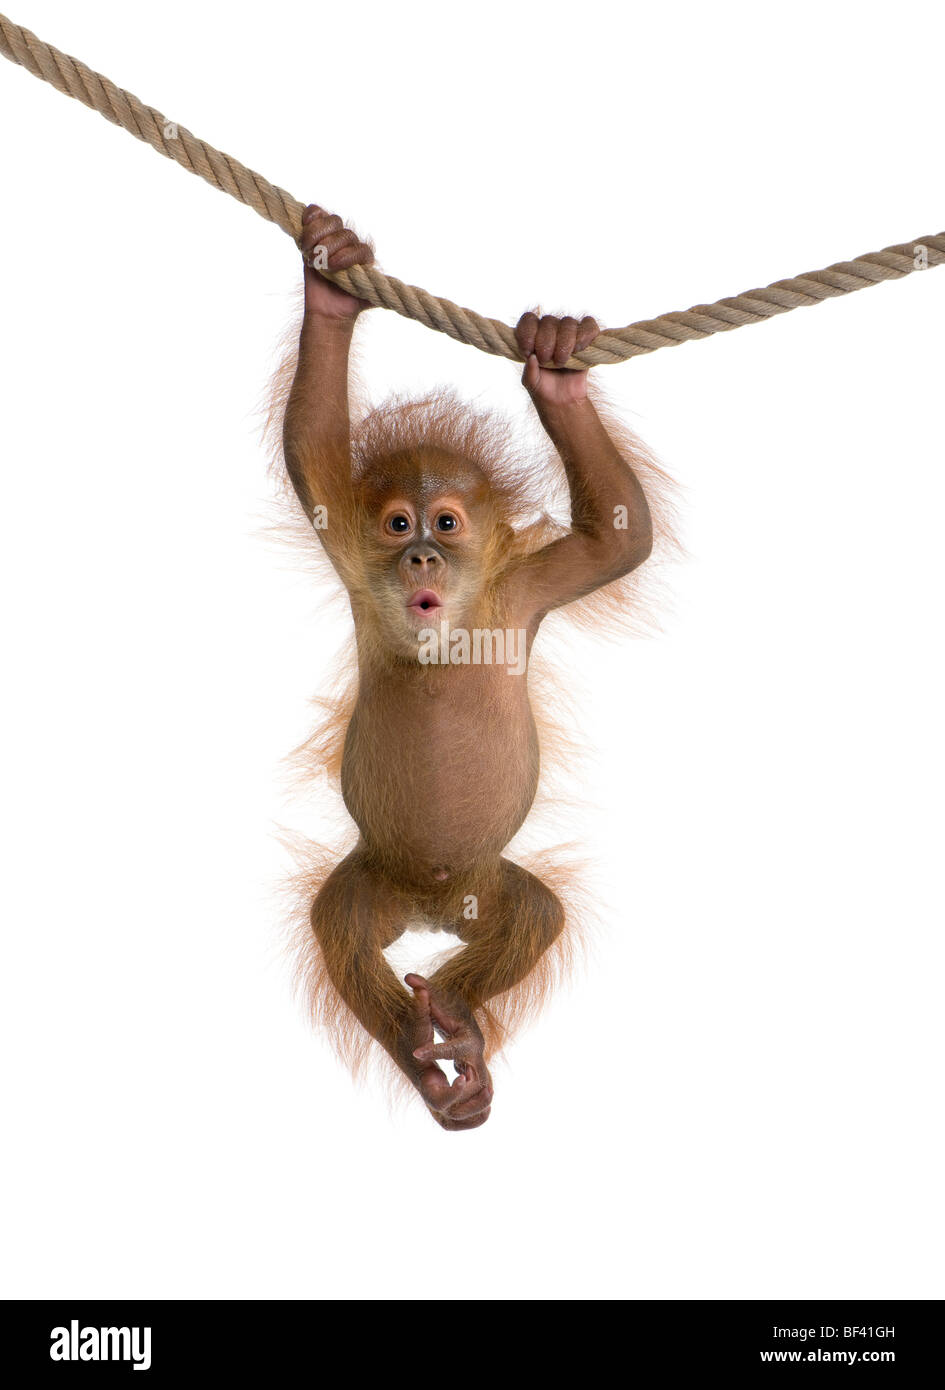 Baby Sumatran Orangutang, 4 months old, hanging on a rope in front of a white background, studio shot Stock Photo